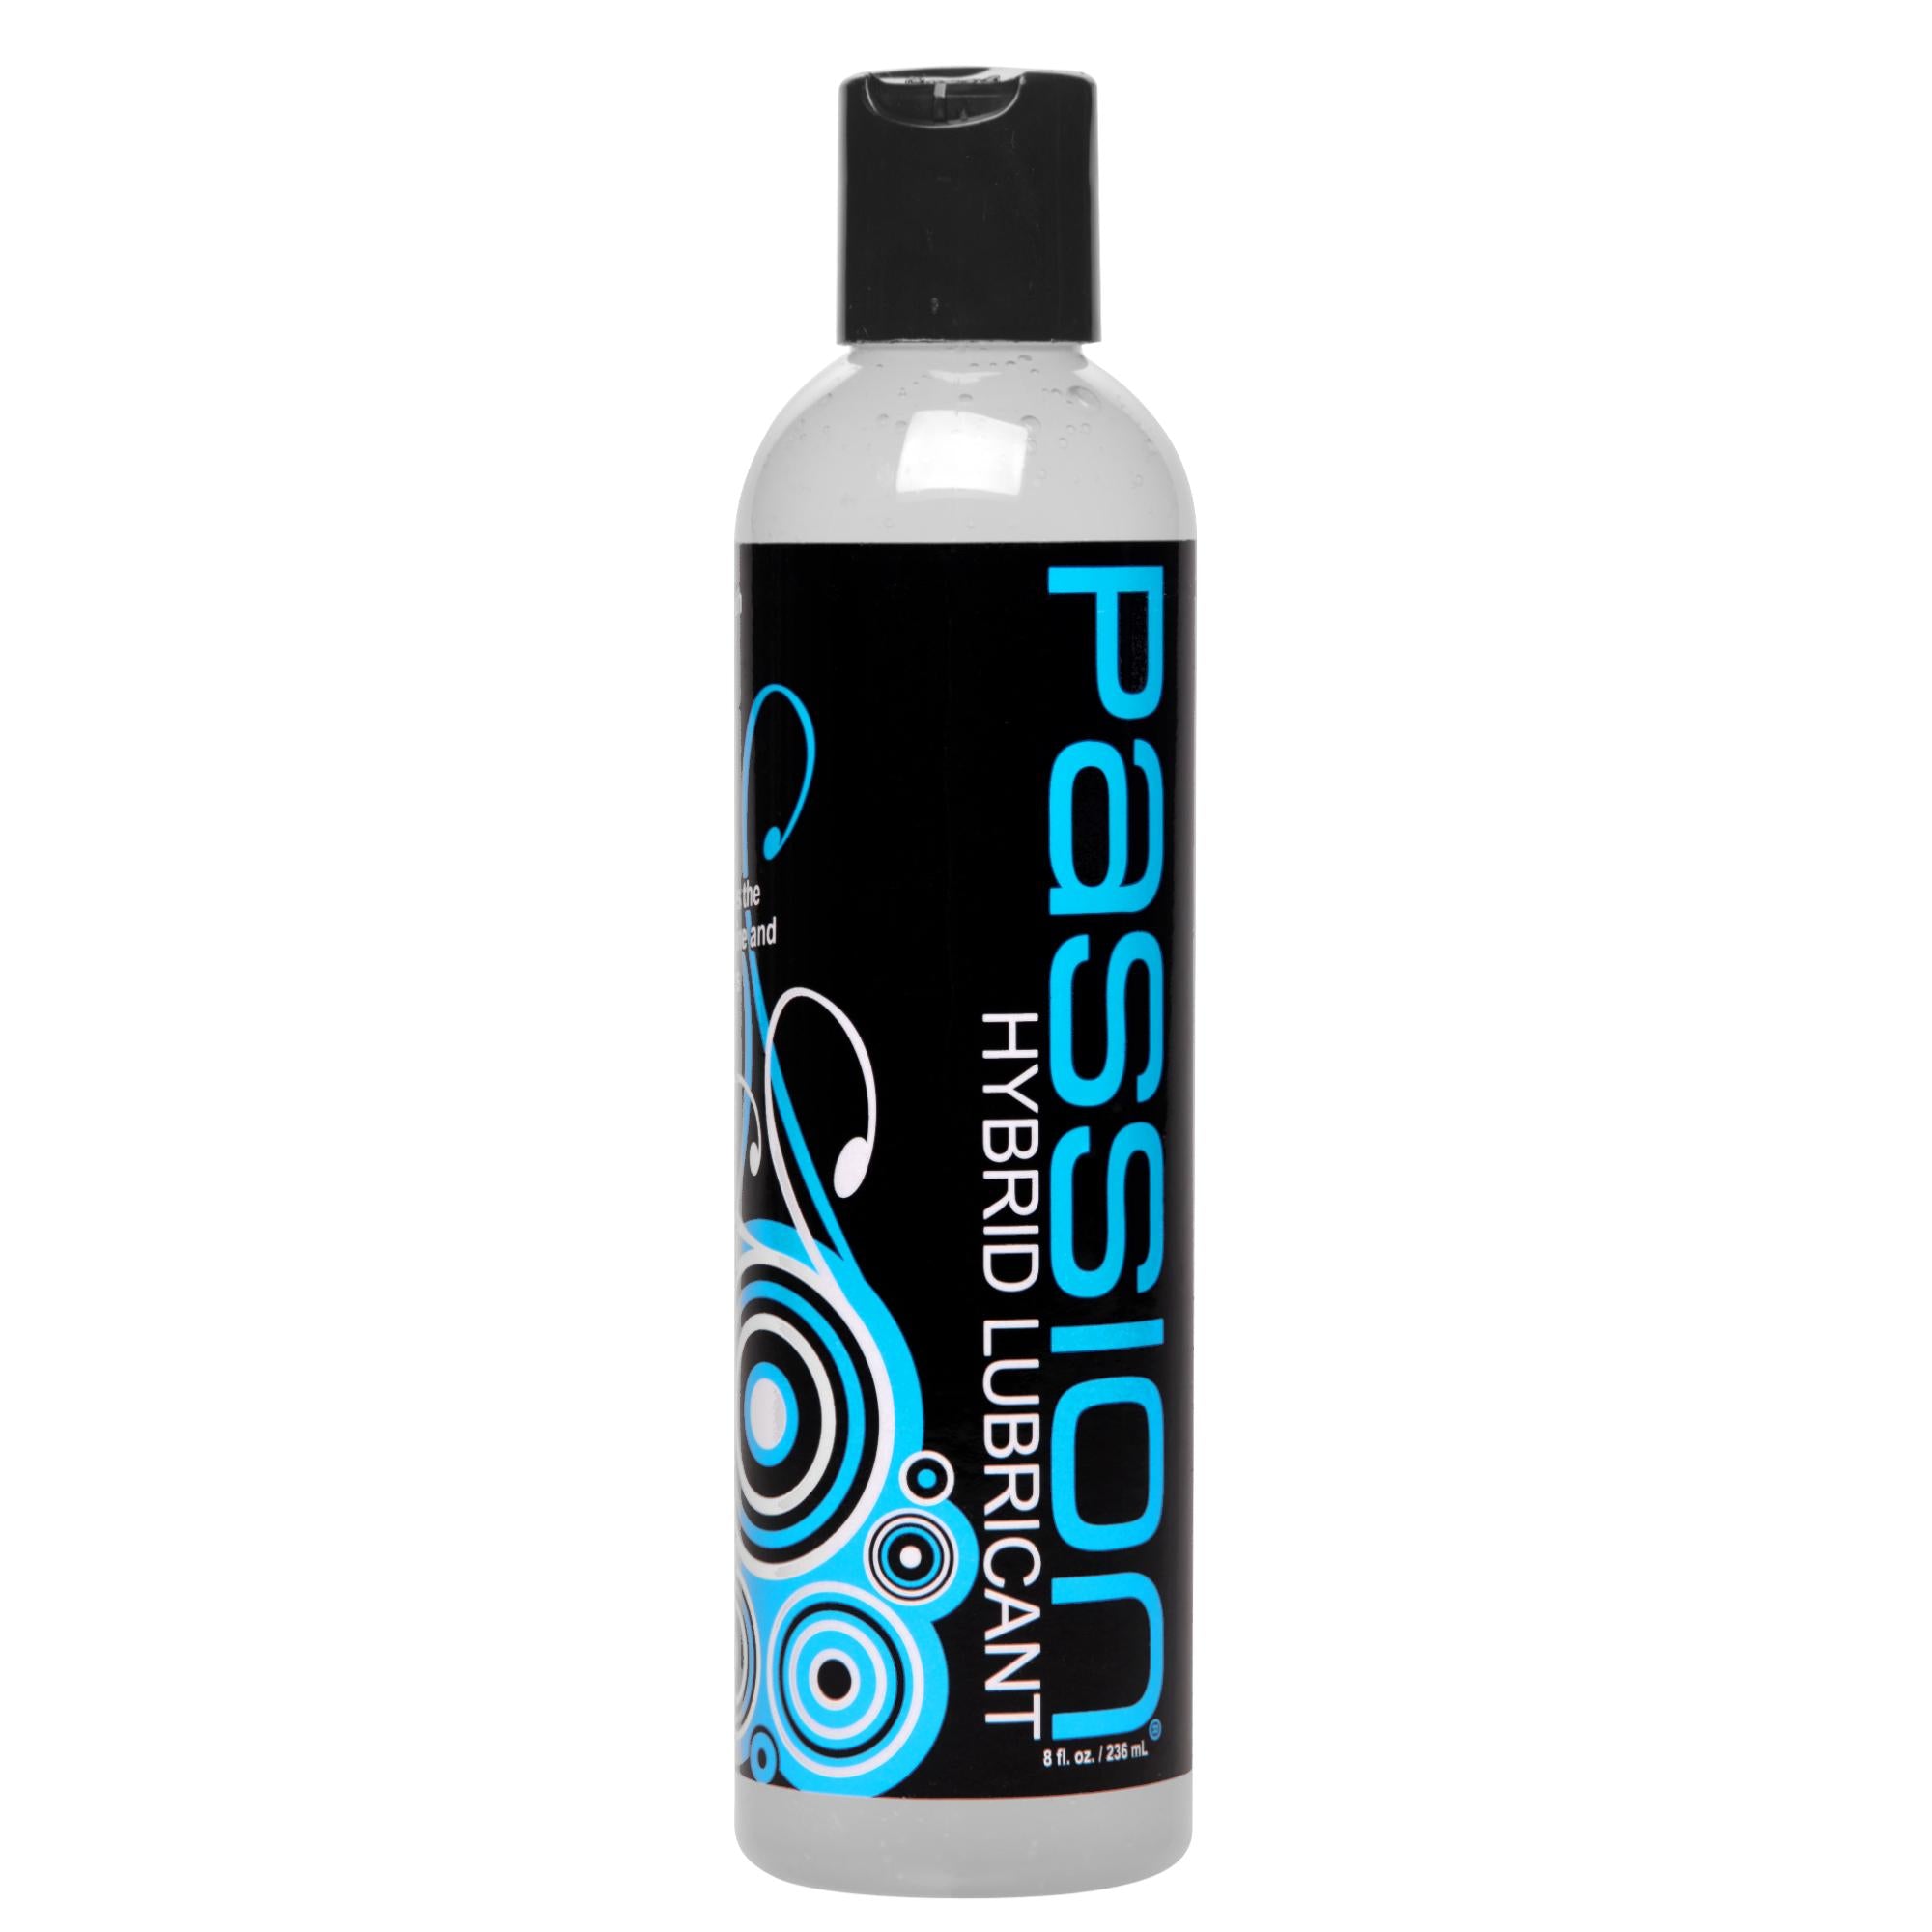 Passion Lubricants Passion Hybrid Water & Silicone Blend Lube- 8 oz.